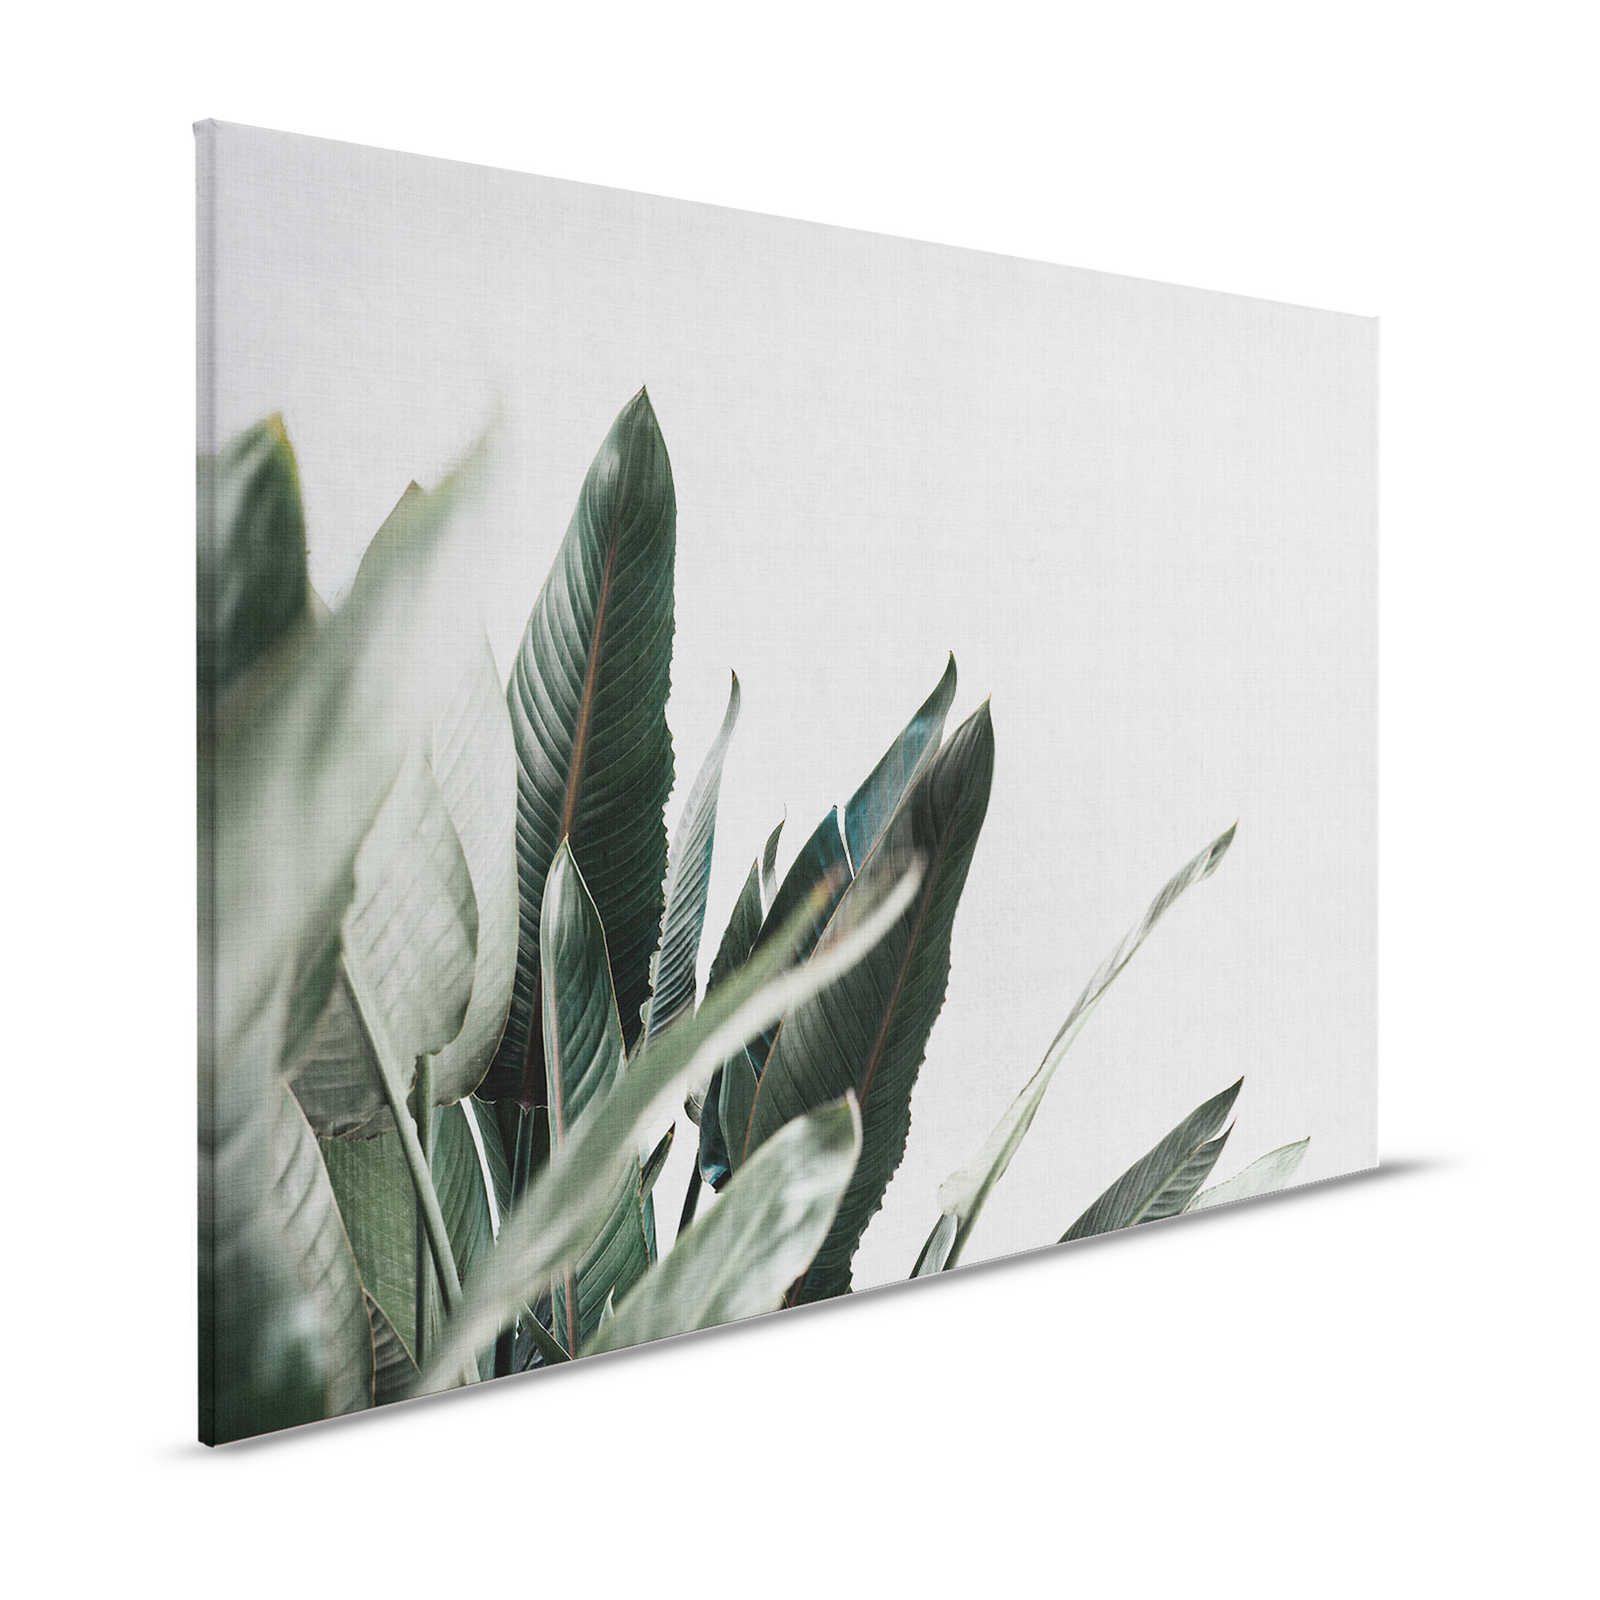 Urban jungle 1 - Canvas painting with palm leaves in natural linen look - 1.20 m x 0.80 m
